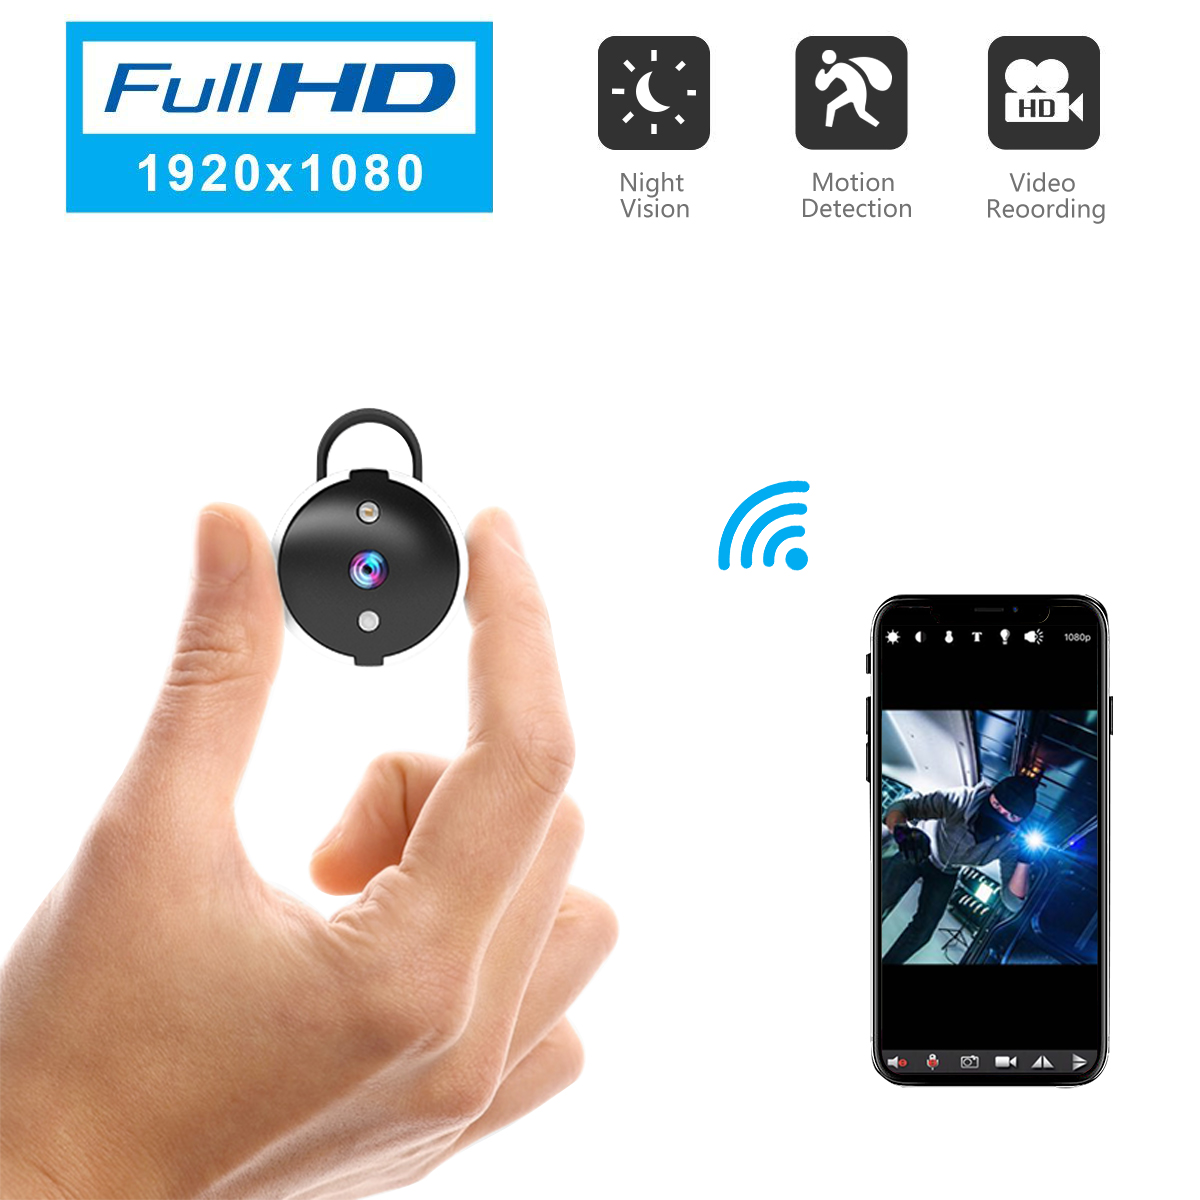 Spy Camera Wireless Hidden Security Camera Mini Portable Wi-Fi Cam HD 1080P Covert Secret Nanny Cameras for Home, Office Monitor Video Recorder Live Streaming via Android/iOS APP